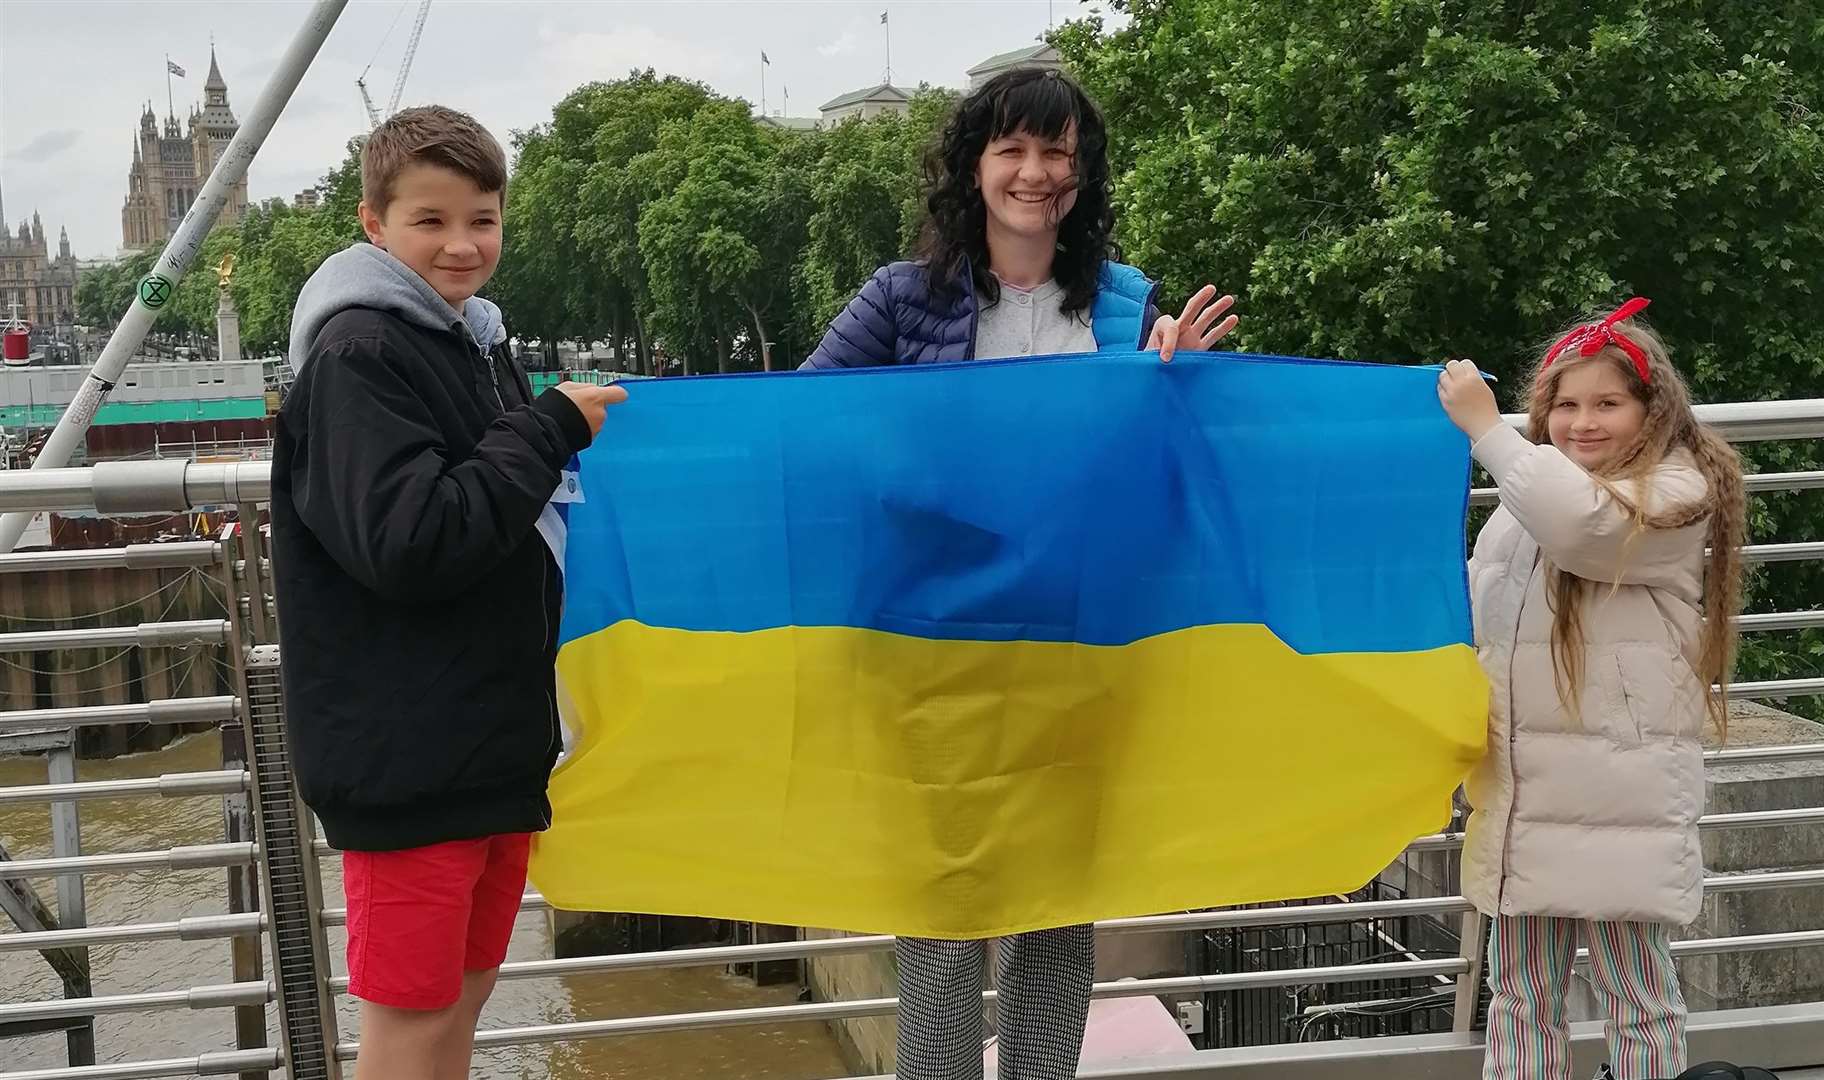 Khrystyna with her mother Natalia and brother Myroslav in London this year. Submitted picture